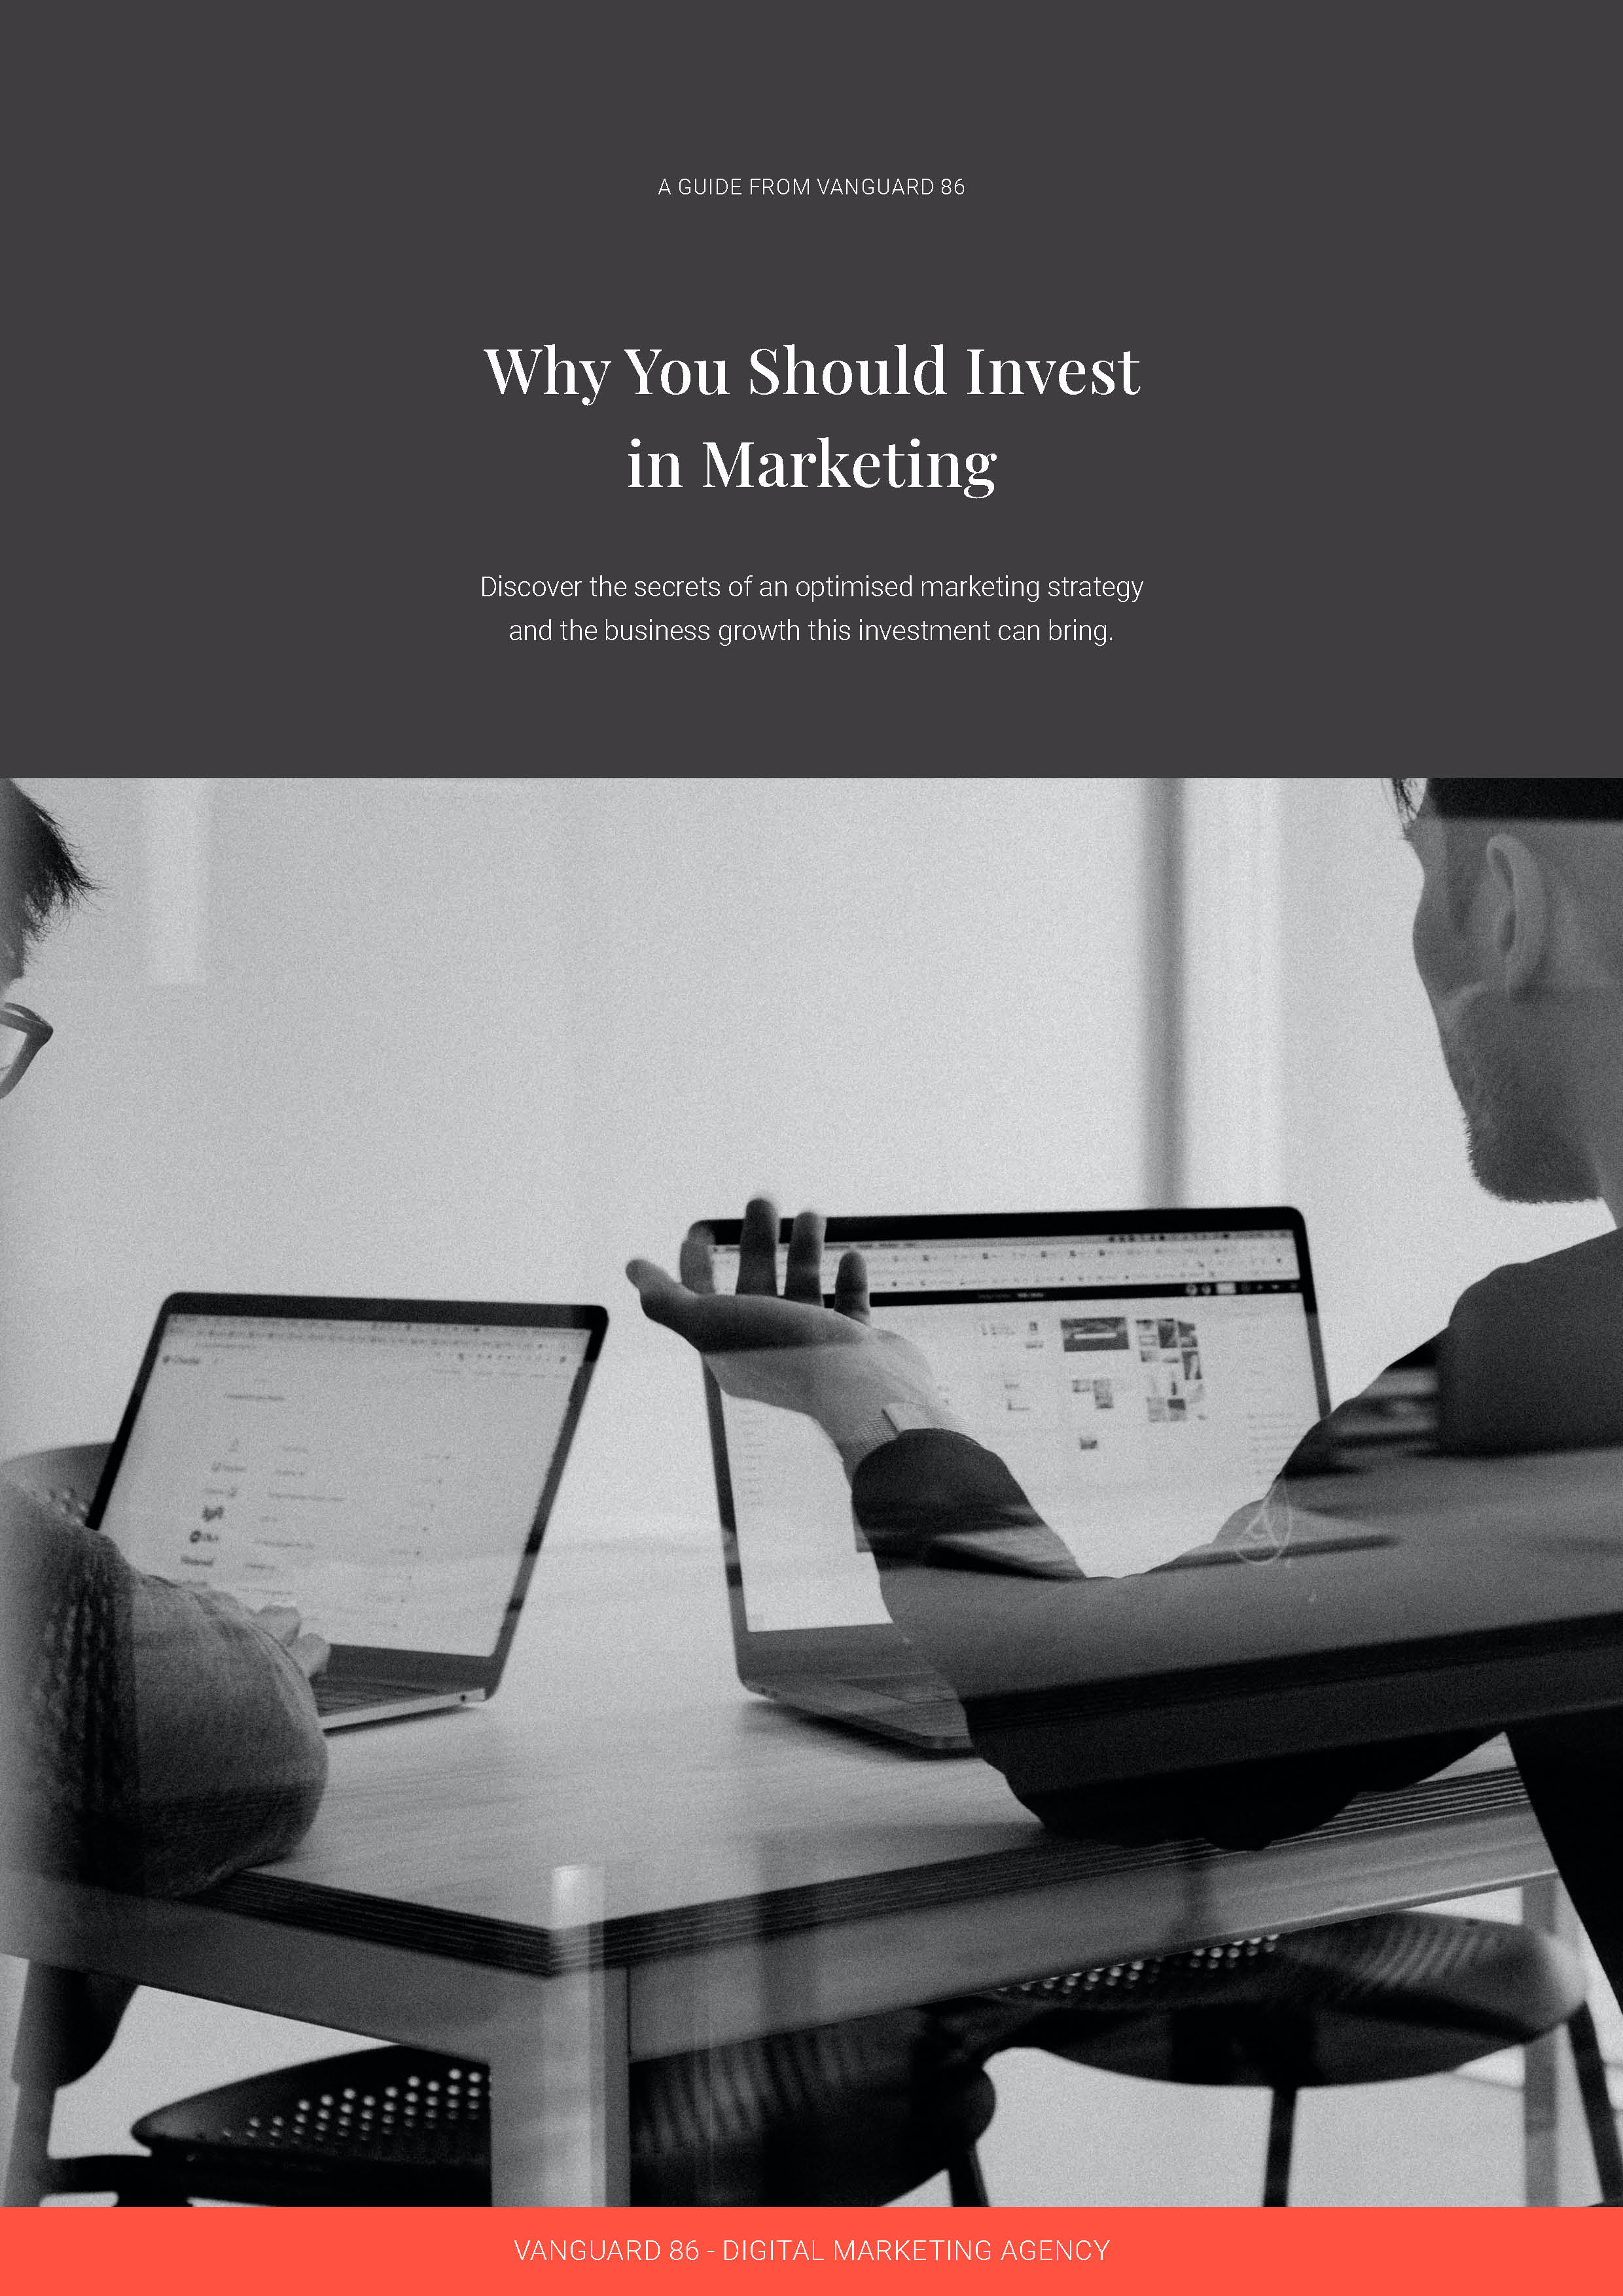 Why invest in marketing